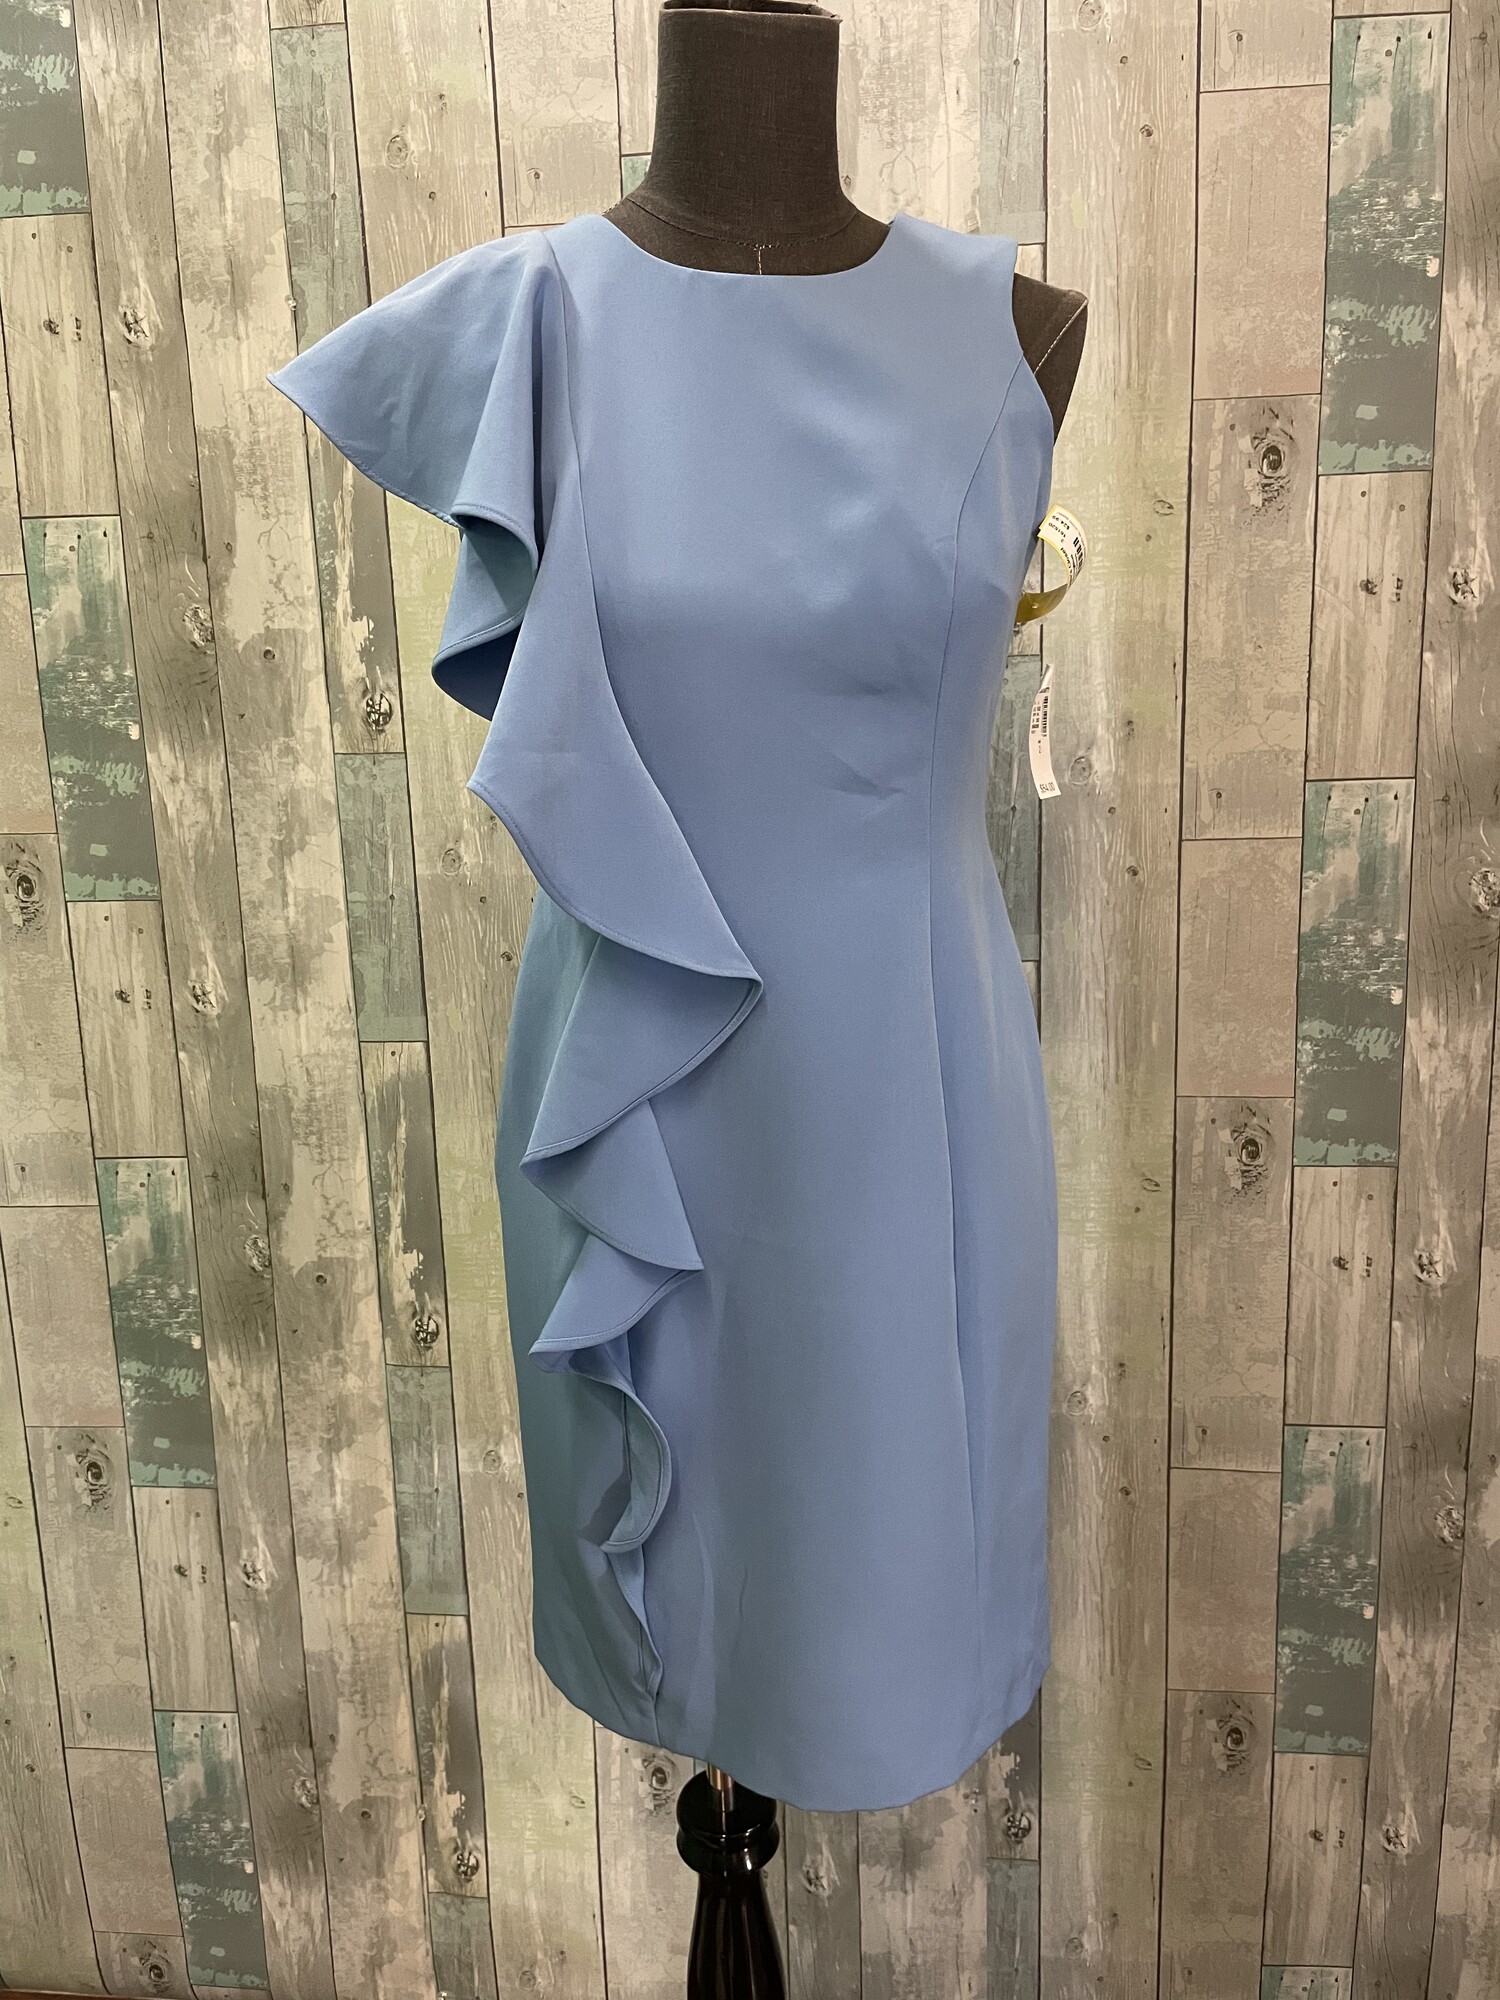 NEW Roz & Ali Dress
Polyester and spandex blend
Retail: $54.00
Blue
Size: 2